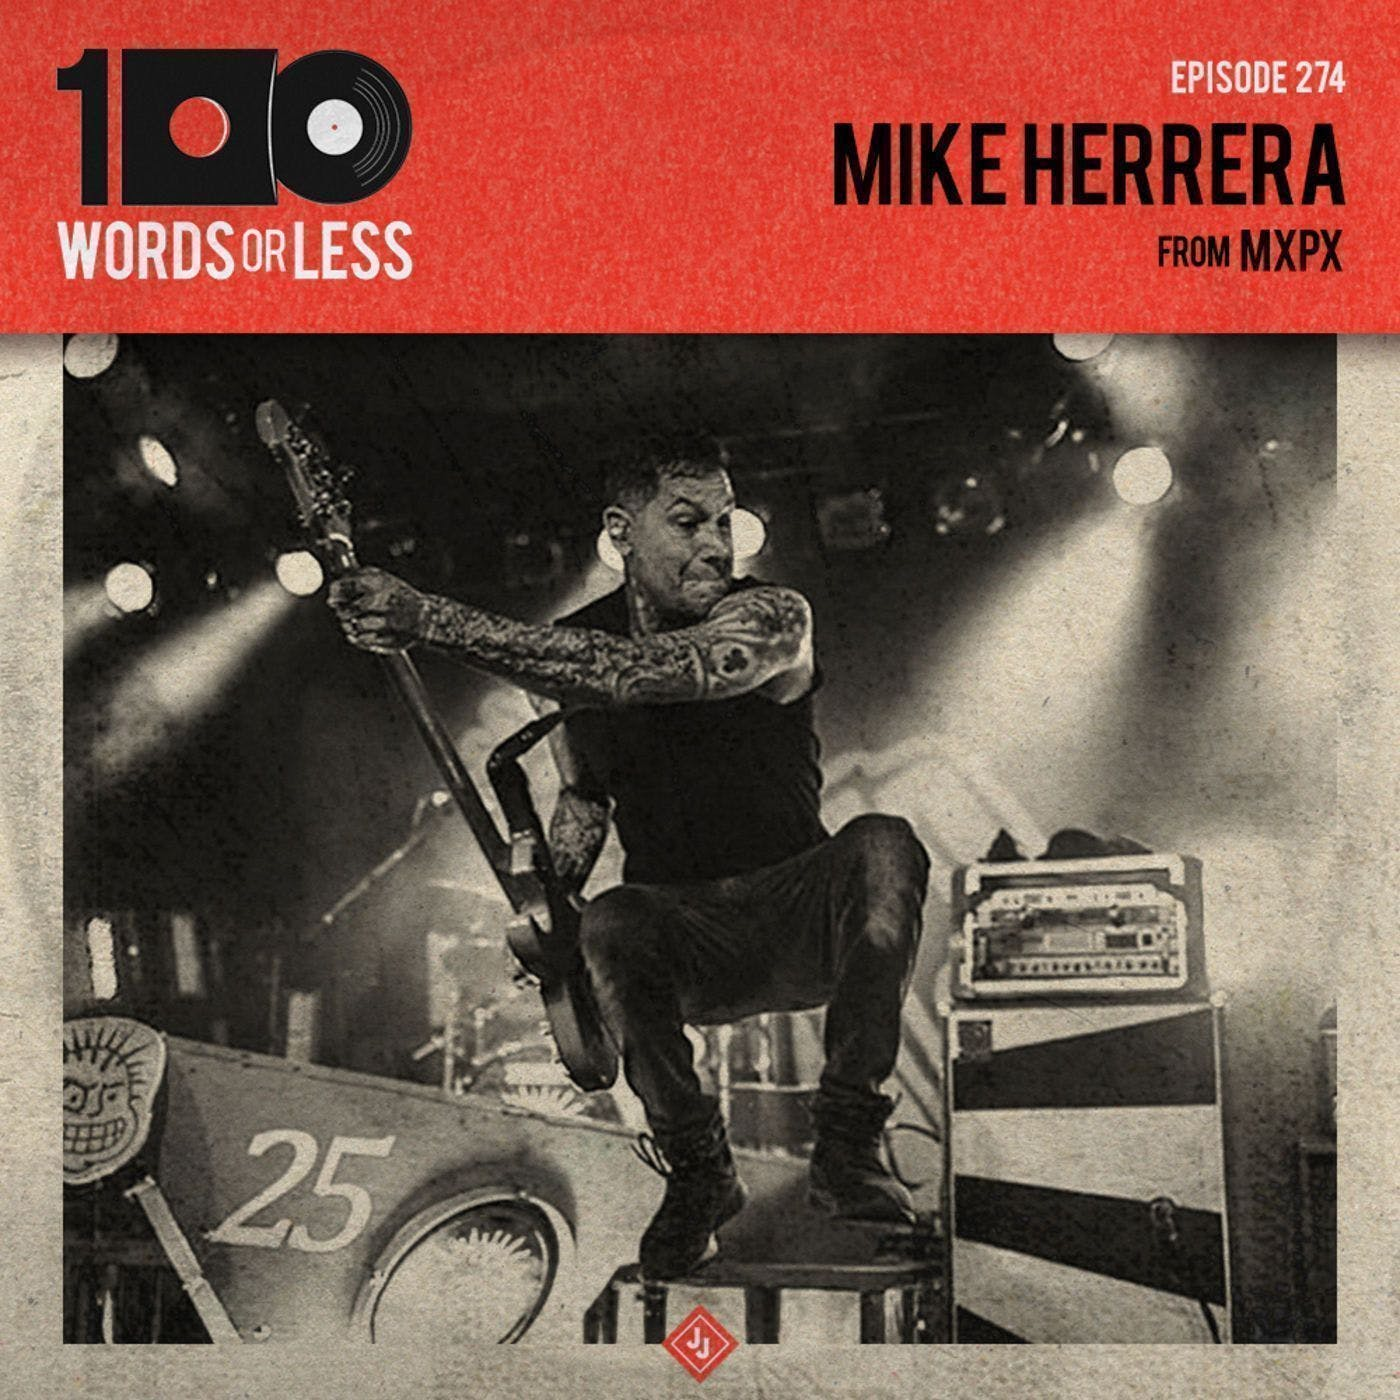  Mike Herrera from MXPX